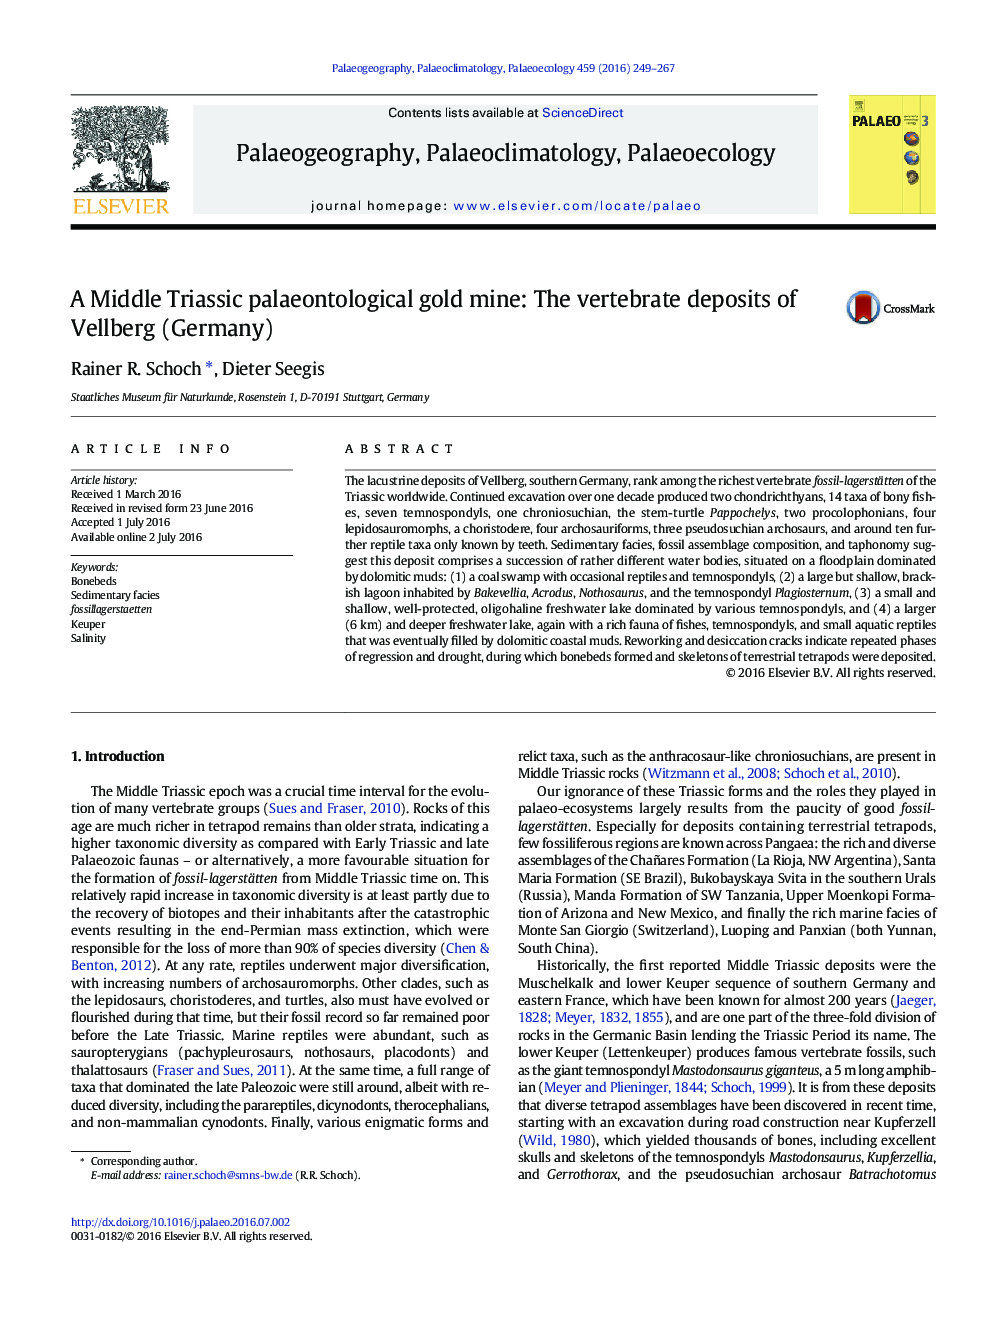 A Middle Triassic palaeontological gold mine: The vertebrate deposits of Vellberg (Germany)